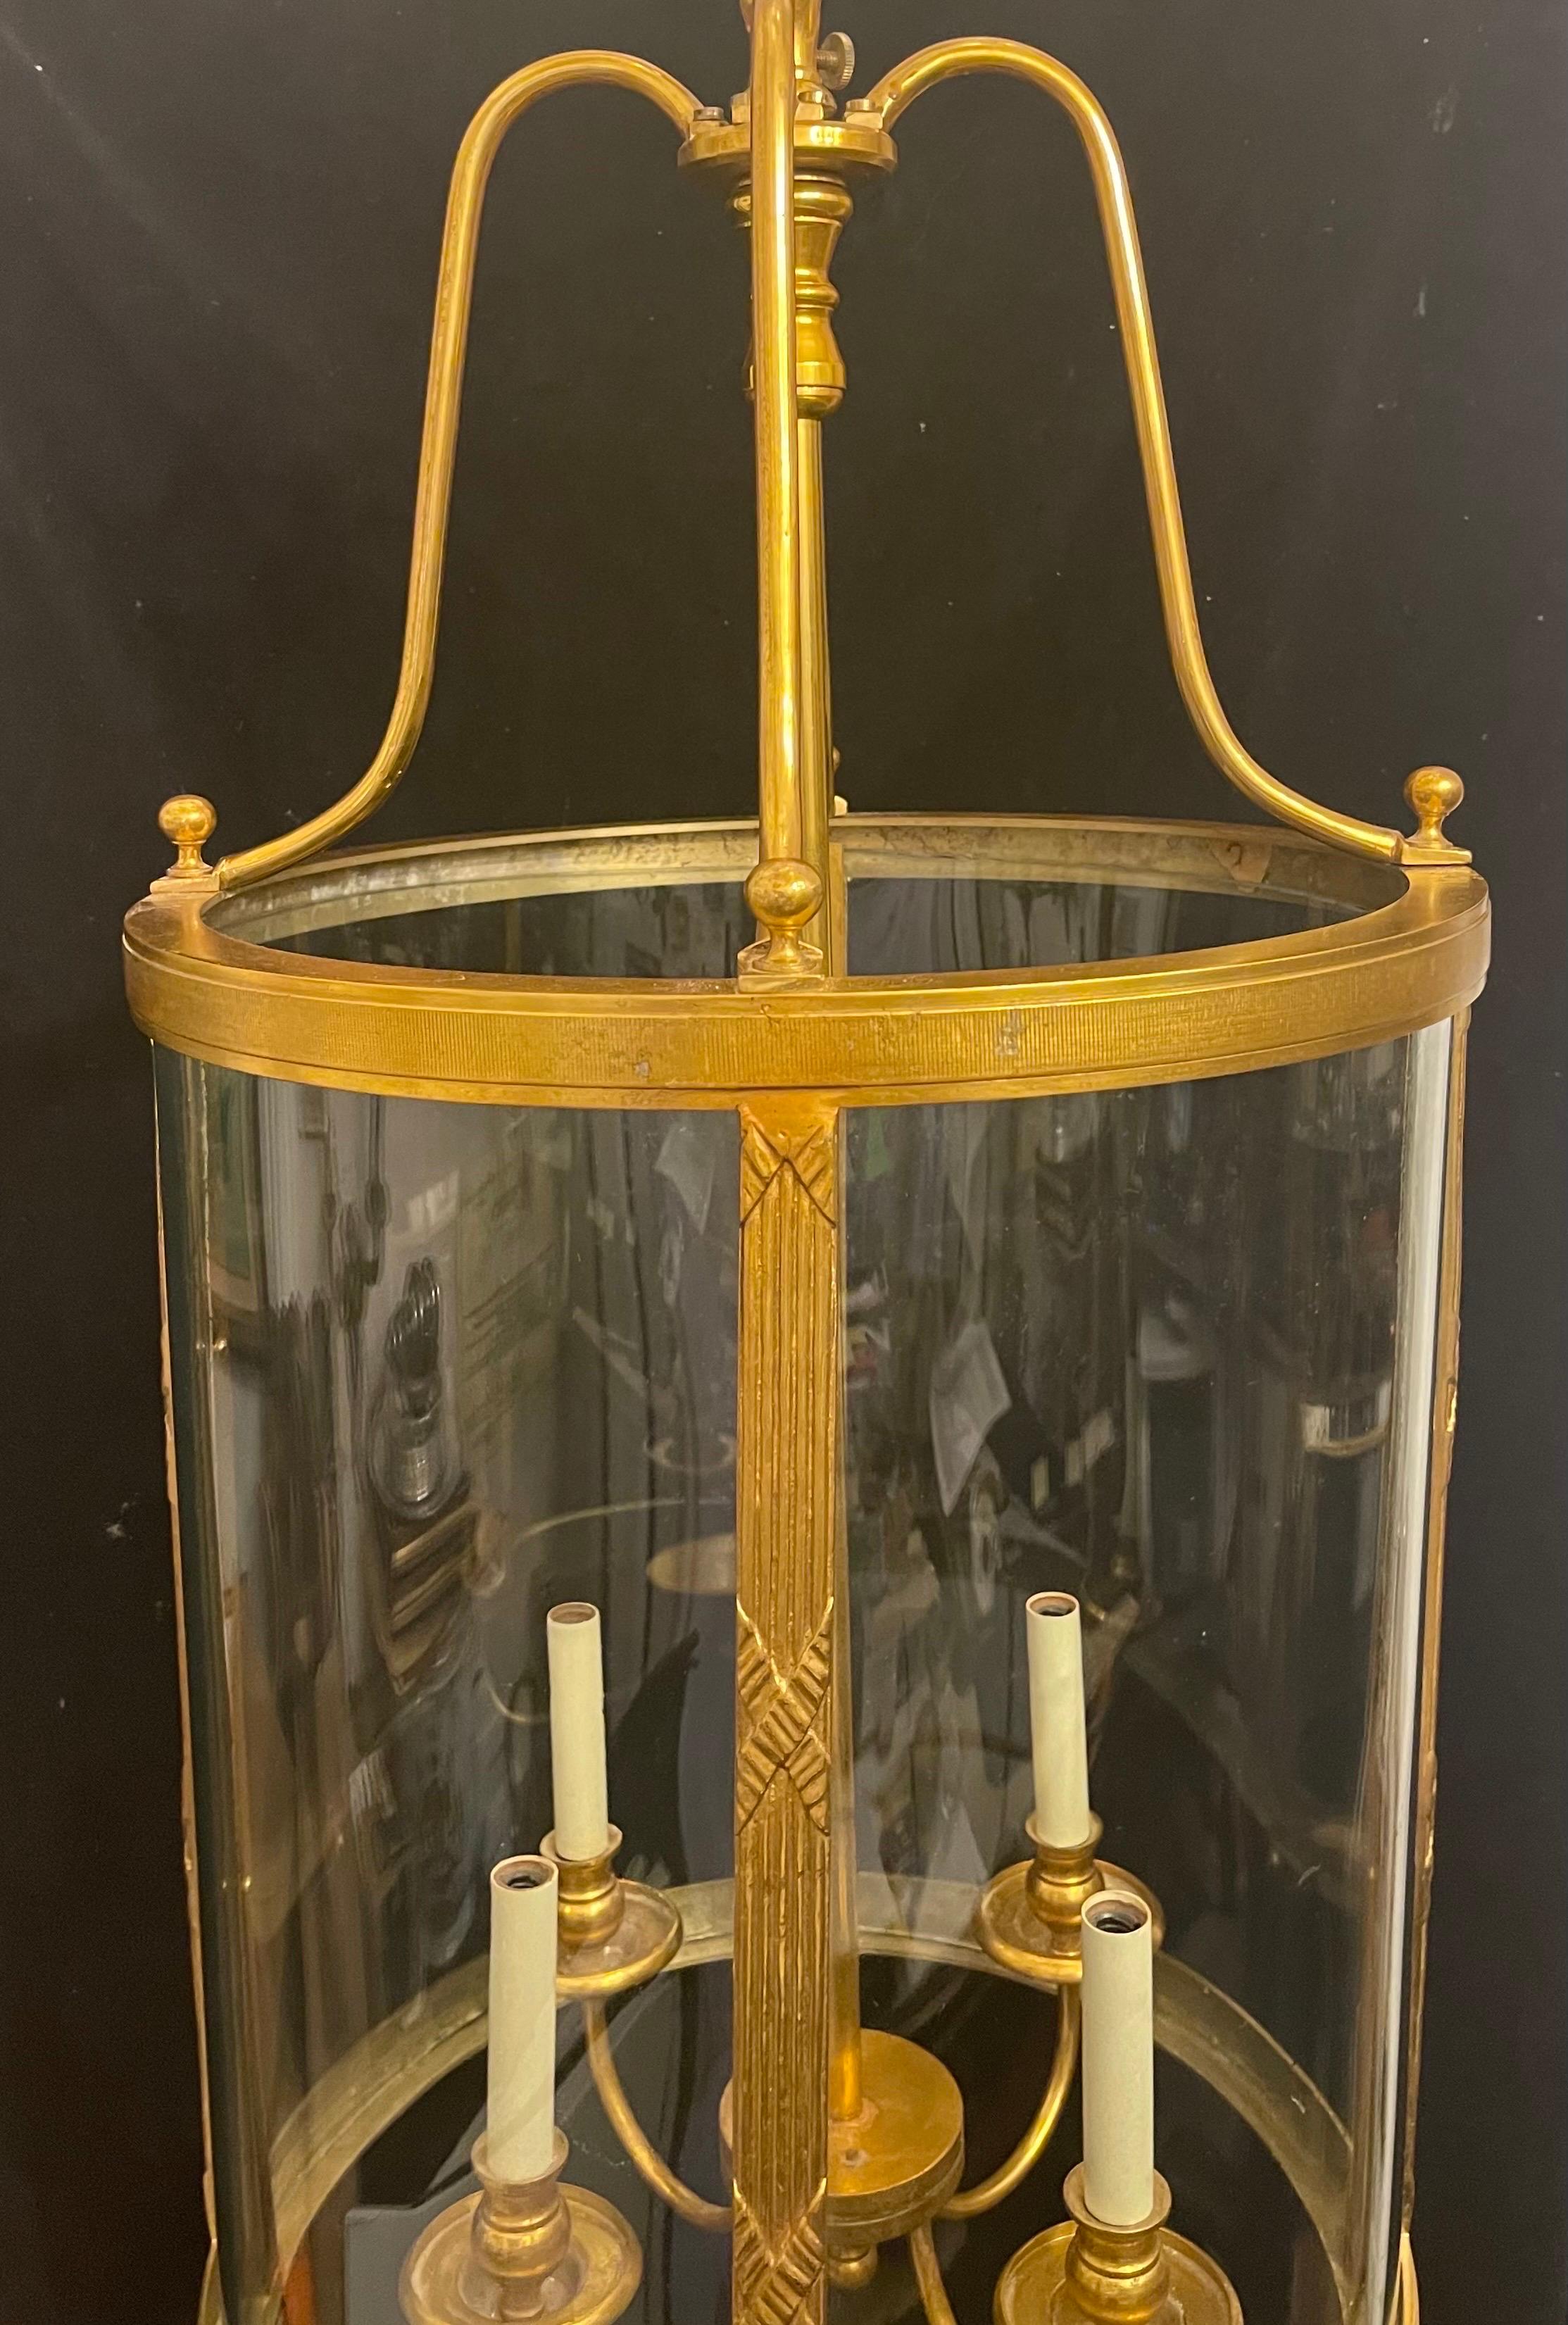 Neoclassical Wonderful Large French Bronze Regency Empire Curved Glass Panel Lantern Fixture For Sale